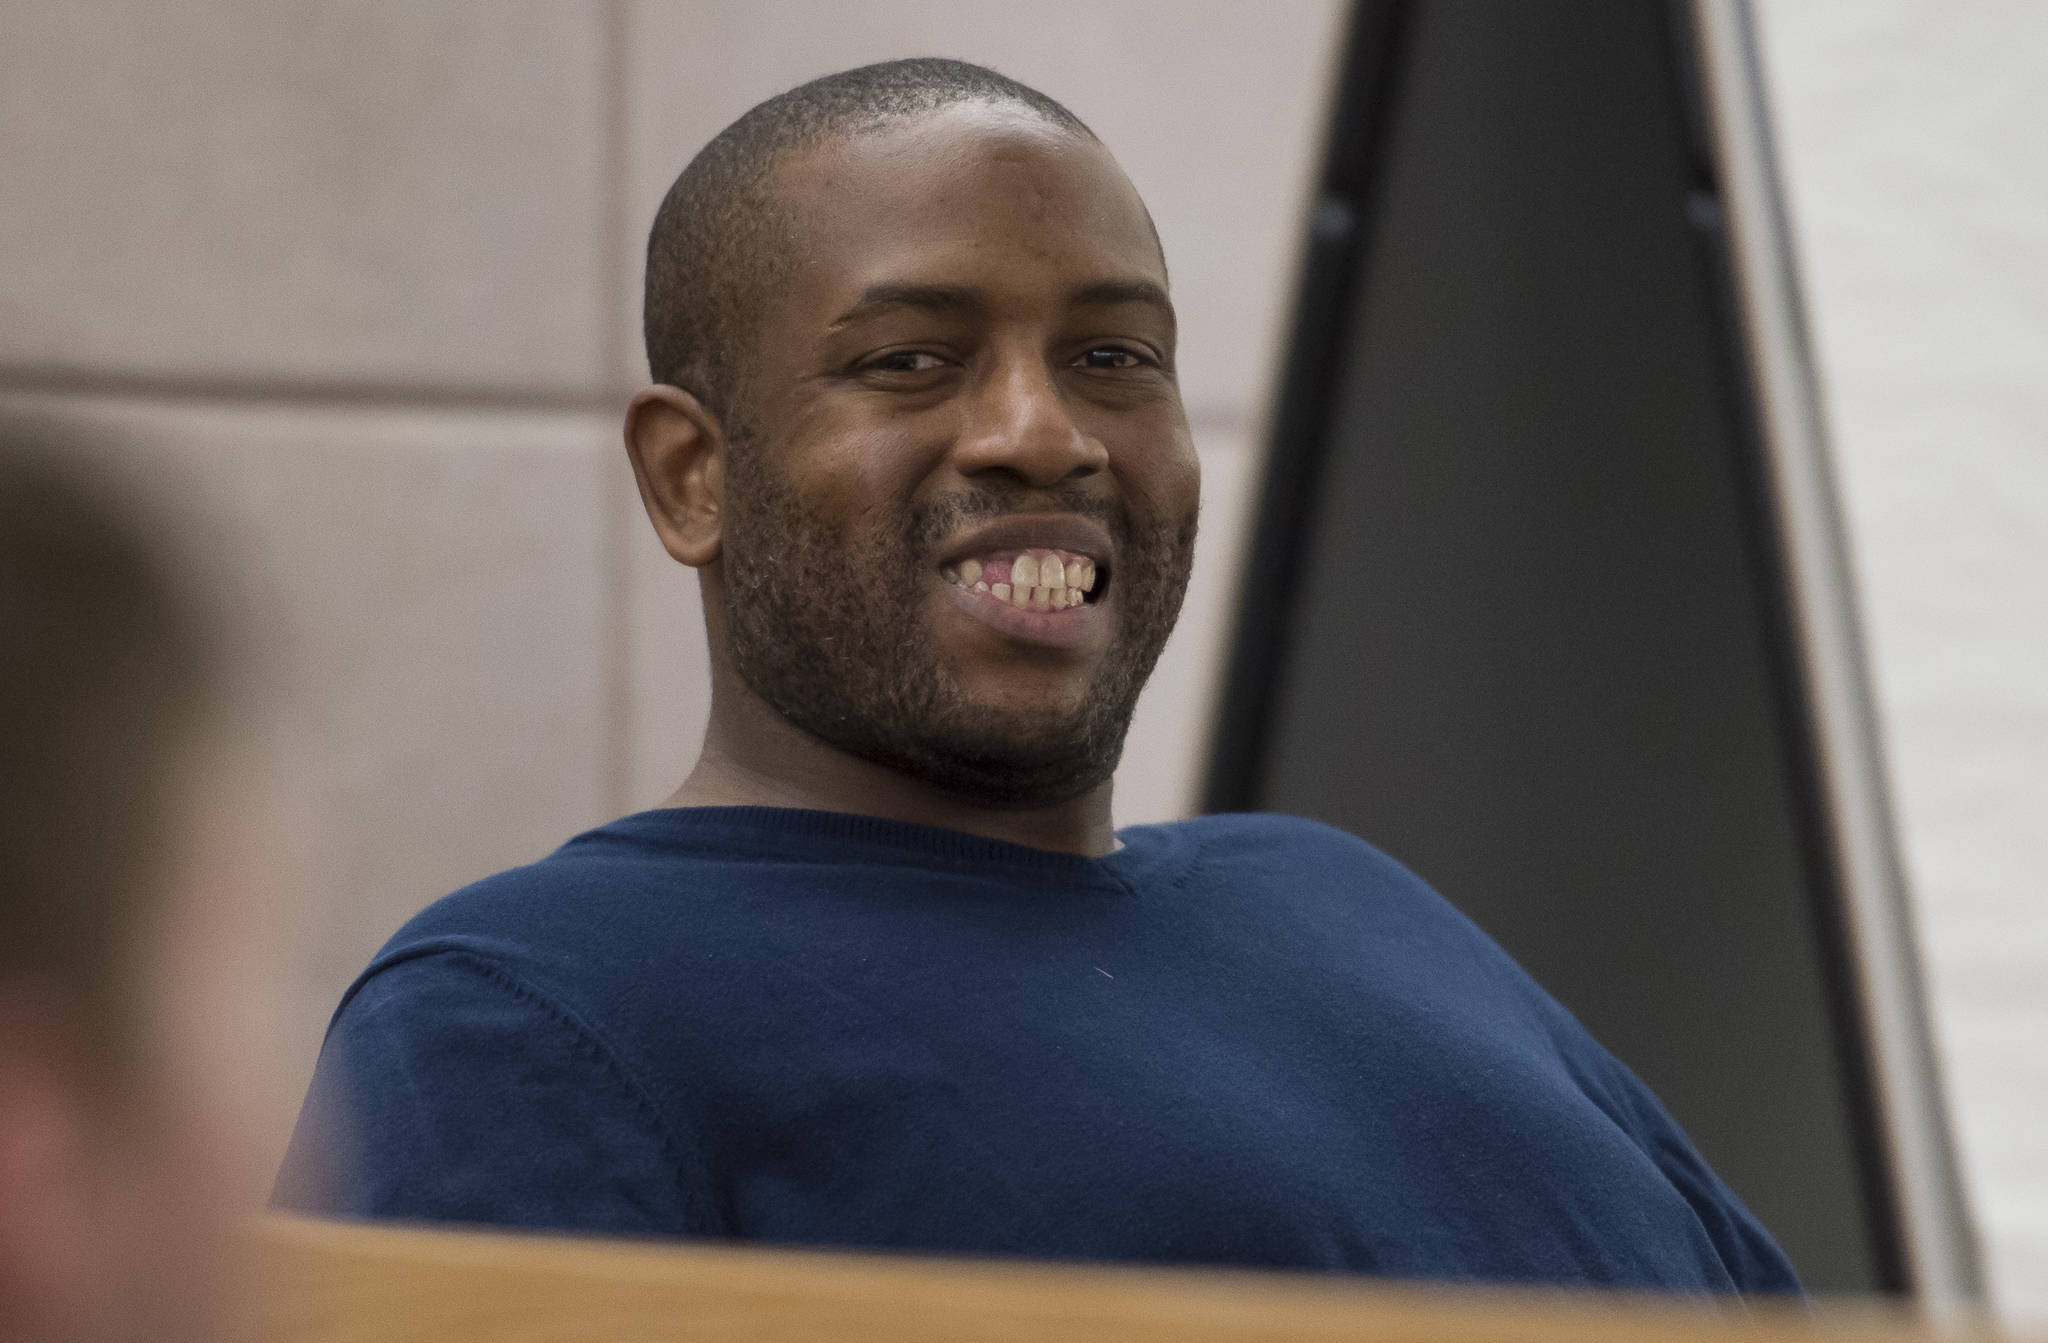 Laron Carlton Graham appears in Juneau Superior Court on Monday, Feb. 26, 2018, for an arraignment on two counts of first-degree murder for the Nov. 15, 2015 shooting deaths of 36-year-old Robert H. Meireis and 34-year-old Elizabeth K. Tonsmeire. (Michael Penn | Juneau Empire)